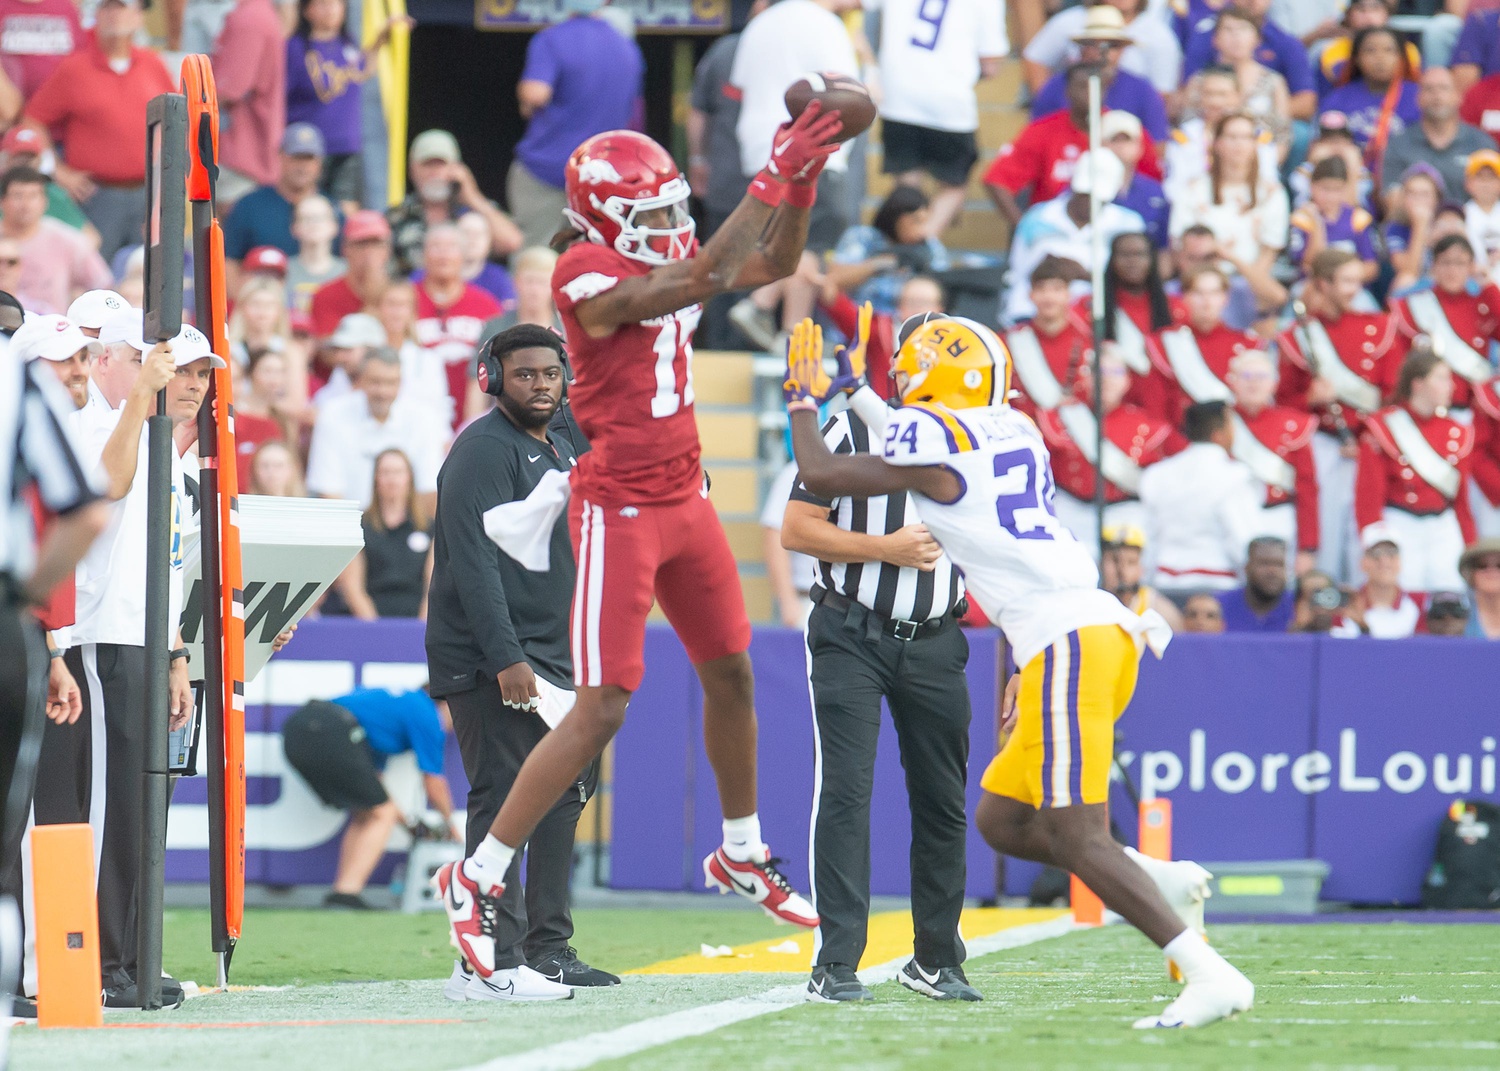 Tyrone Broden 17 makes a catch as the LSU Tigers take on the Arkansas Razorbacks at Tiger Stadium.